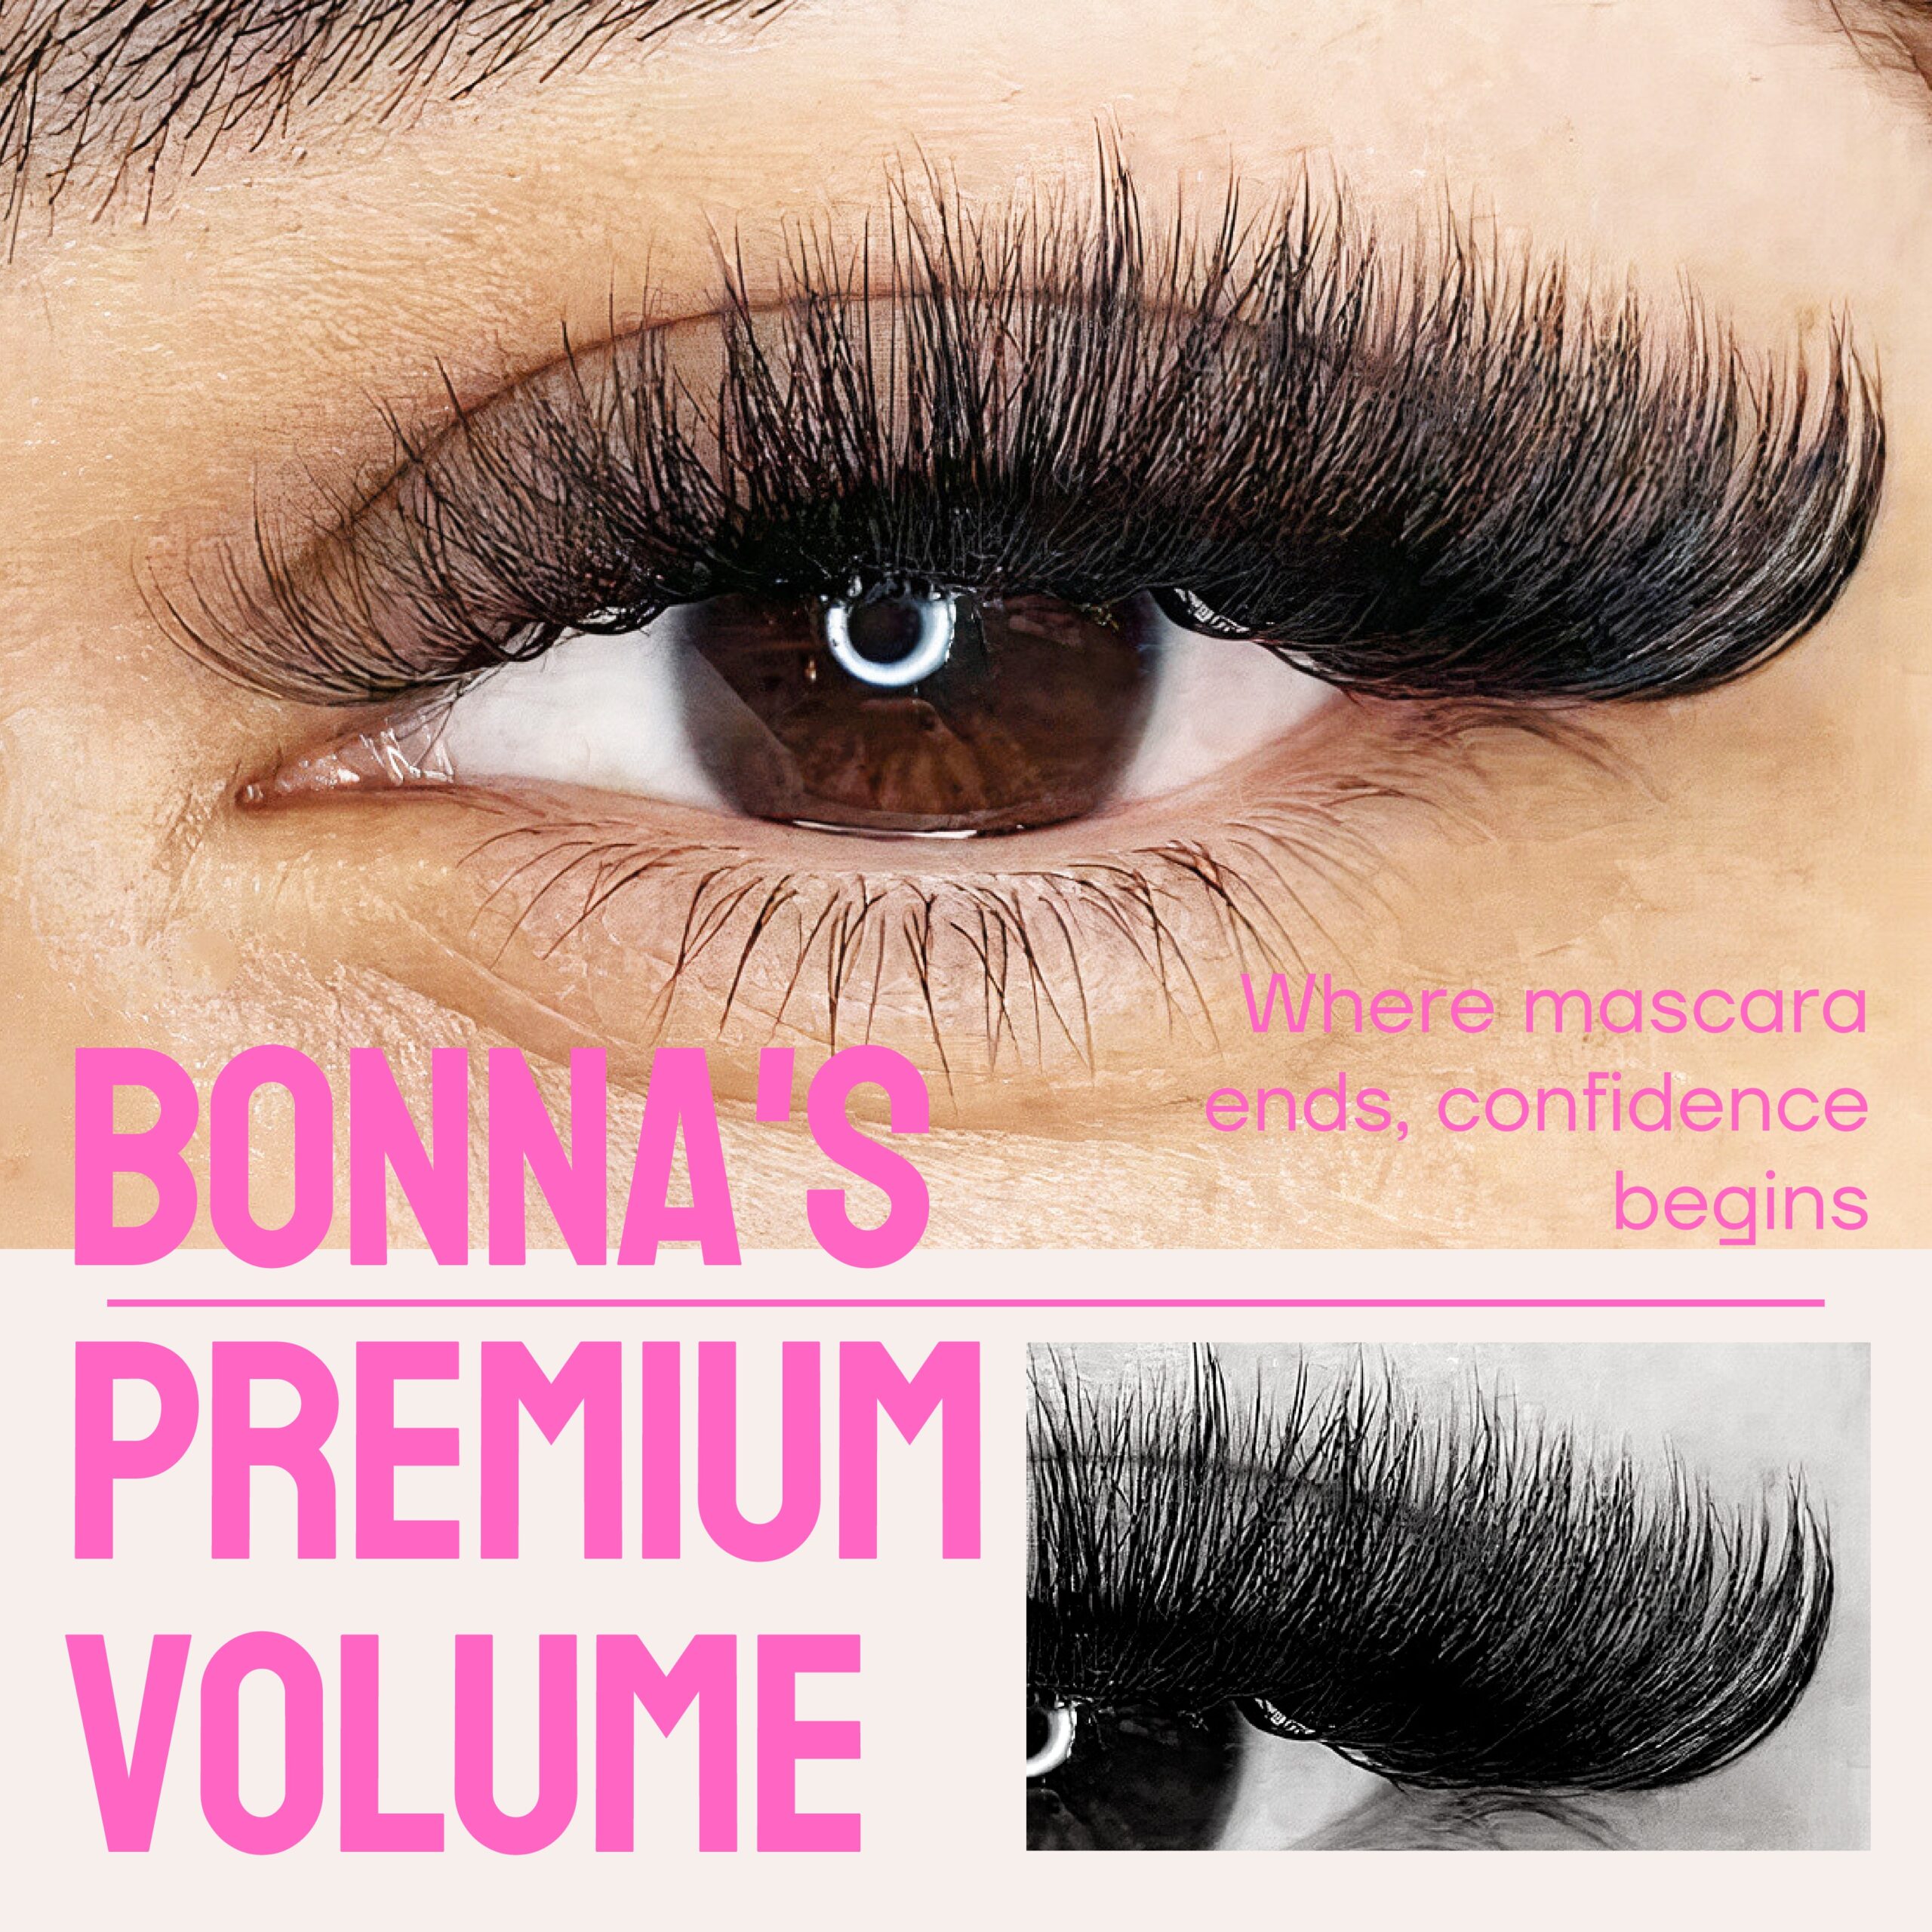 Premium Volume Eyelash Extensions: Your Top 6 Questions Answered by Bonna Beauty